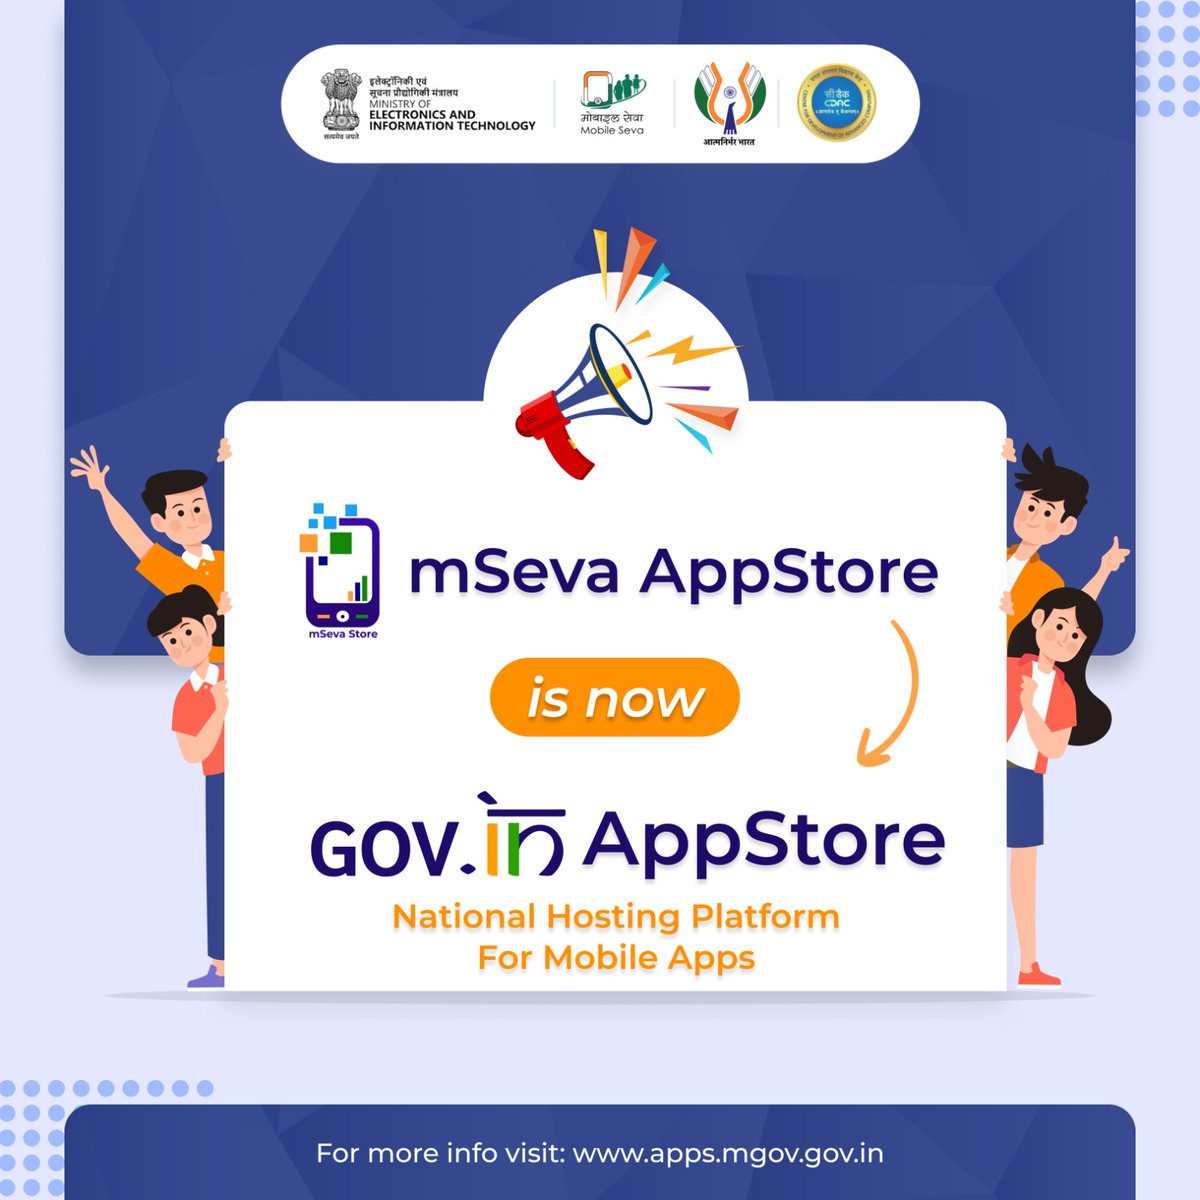 🌟Made in India, Made for India🌟

Calling Indian mobile #appdevelopers to host their mobile applications developed for the delivery of public services on GOV.IN #AppStore (earlier called mSeva Appstore)

apps.mgov.gov.in | #DigitalIndia